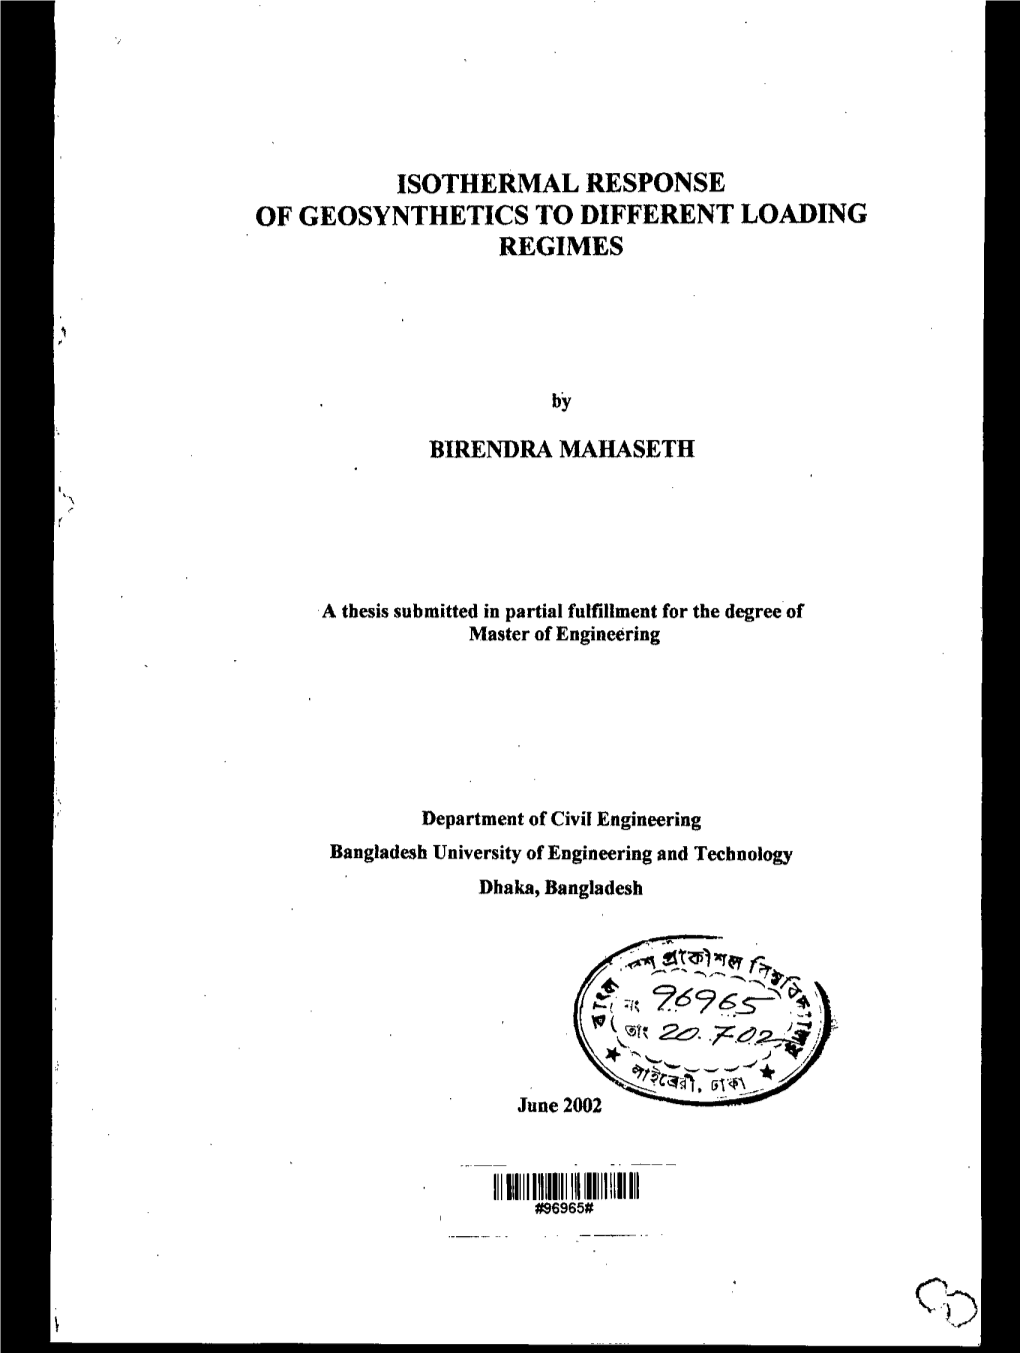 Isothermal Response of Geosynthetics to Different Loading Regimes